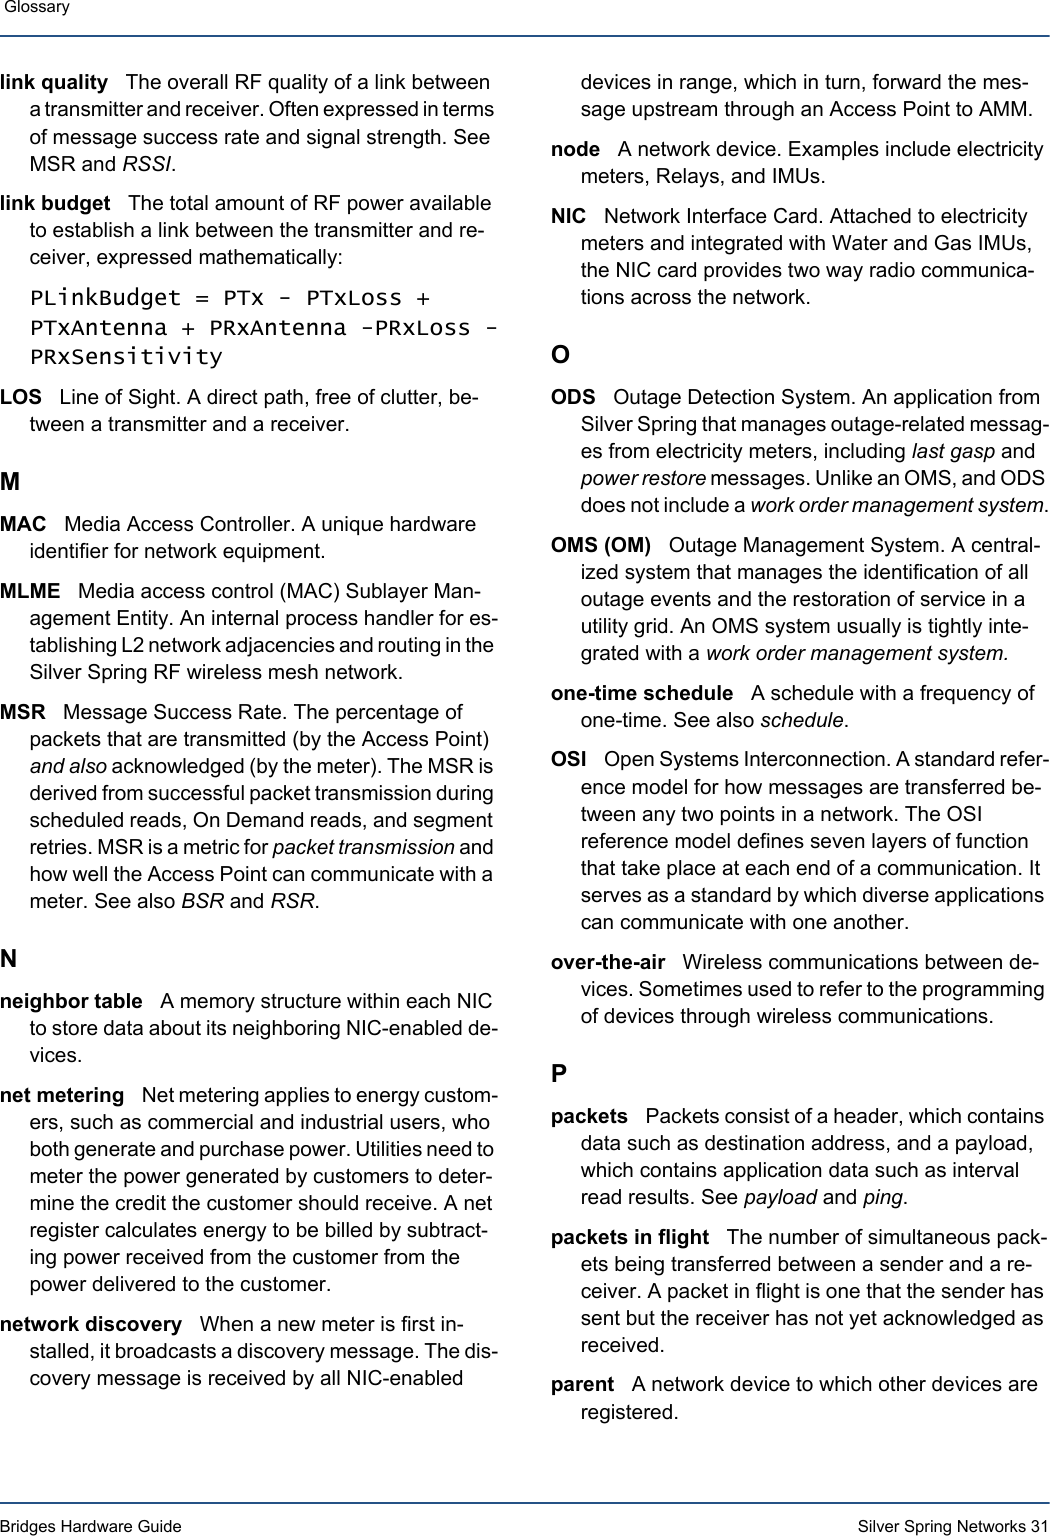 Bridges Hardware Guide Silver Spring Networks 31 Glossary link quality   The overall RF quality of a link between a transmitter and receiver. Often expressed in terms of message success rate and signal strength. See MSR and RSSI.link budget   The total amount of RF power available to establish a link between the transmitter and re-ceiver, expressed mathematically:PLinkBudget = PTx - PTxLoss + PTxAntenna + PRxAntenna -PRxLoss -PRxSensitivityLOS   Line of Sight. A direct path, free of clutter, be-tween a transmitter and a receiver.MMAC   Media Access Controller. A unique hardware identifier for network equipment. MLME   Media access control (MAC) Sublayer Man-agement Entity. An internal process handler for es-tablishing L2 network adjacencies and routing in the Silver Spring RF wireless mesh network.MSR   Message Success Rate. The percentage of packets that are transmitted (by the Access Point) and also acknowledged (by the meter). The MSR is derived from successful packet transmission during scheduled reads, On Demand reads, and segment retries. MSR is a metric for packet transmission and how well the Access Point can communicate with a meter. See also BSR and RSR.Nneighbor table   A memory structure within each NIC to store data about its neighboring NIC-enabled de-vices.net metering   Net metering applies to energy custom-ers, such as commercial and industrial users, who both generate and purchase power. Utilities need to meter the power generated by customers to deter-mine the credit the customer should receive. A net register calculates energy to be billed by subtract-ing power received from the customer from the power delivered to the customer. network discovery   When a new meter is first in-stalled, it broadcasts a discovery message. The dis-covery message is received by all NIC-enabled devices in range, which in turn, forward the mes-sage upstream through an Access Point to AMM. node   A network device. Examples include electricity meters, Relays, and IMUs.NIC   Network Interface Card. Attached to electricity meters and integrated with Water and Gas IMUs, the NIC card provides two way radio communica-tions across the network.OODS   Outage Detection System. An application from Silver Spring that manages outage-related messag-es from electricity meters, including last gasp and power restore messages. Unlike an OMS, and ODS does not include a work order management system.OMS (OM)   Outage Management System. A central-ized system that manages the identification of all outage events and the restoration of service in a utility grid. An OMS system usually is tightly inte-grated with a work order management system.one-time schedule   A schedule with a frequency of one-time. See also schedule.OSI   Open Systems Interconnection. A standard refer-ence model for how messages are transferred be-tween any two points in a network. The OSI reference model defines seven layers of function that take place at each end of a communication. It serves as a standard by which diverse applications can communicate with one another.over-the-air   Wireless communications between de-vices. Sometimes used to refer to the programming of devices through wireless communications.Ppackets   Packets consist of a header, which contains data such as destination address, and a payload, which contains application data such as interval read results. See payload and ping.packets in flight   The number of simultaneous pack-ets being transferred between a sender and a re-ceiver. A packet in flight is one that the sender has sent but the receiver has not yet acknowledged as received.parent   A network device to which other devices are registered.